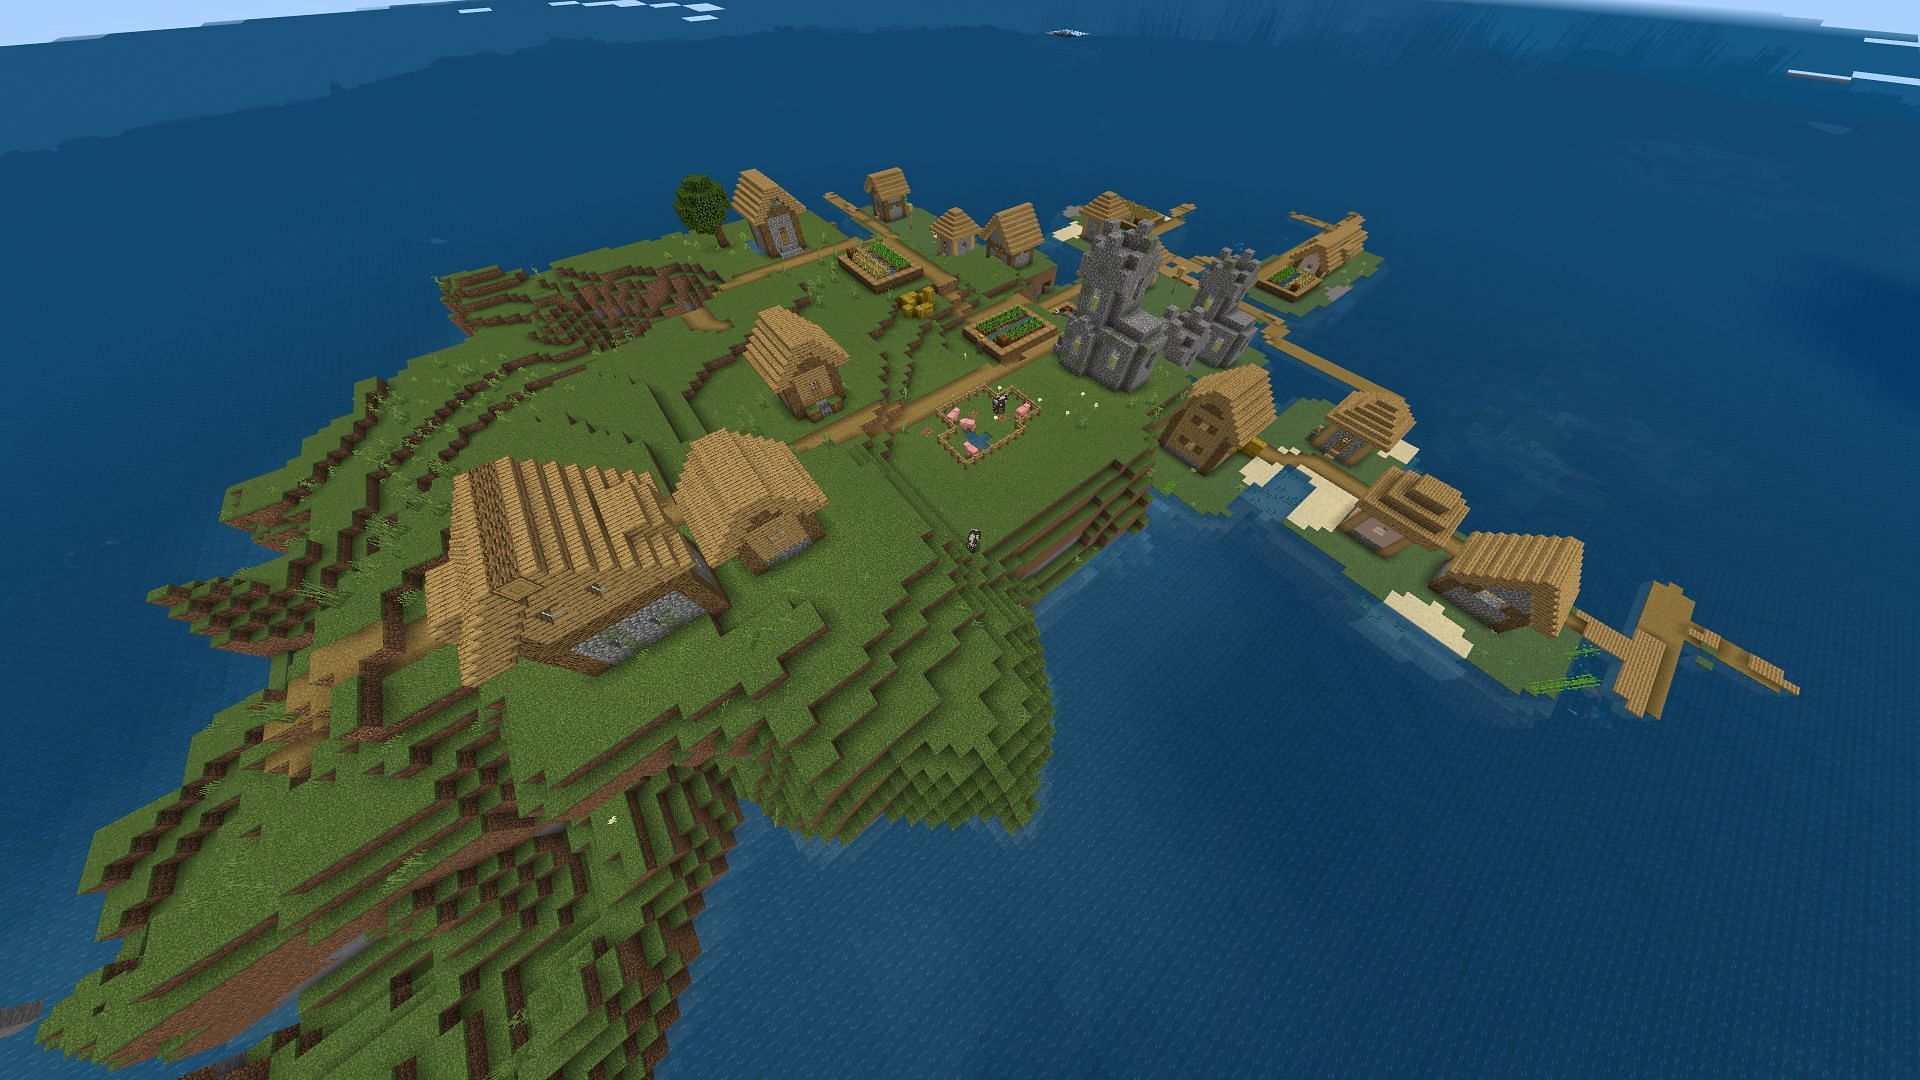 This island village has a subterranean secret in this Minecraft seed (Image via Mojang)